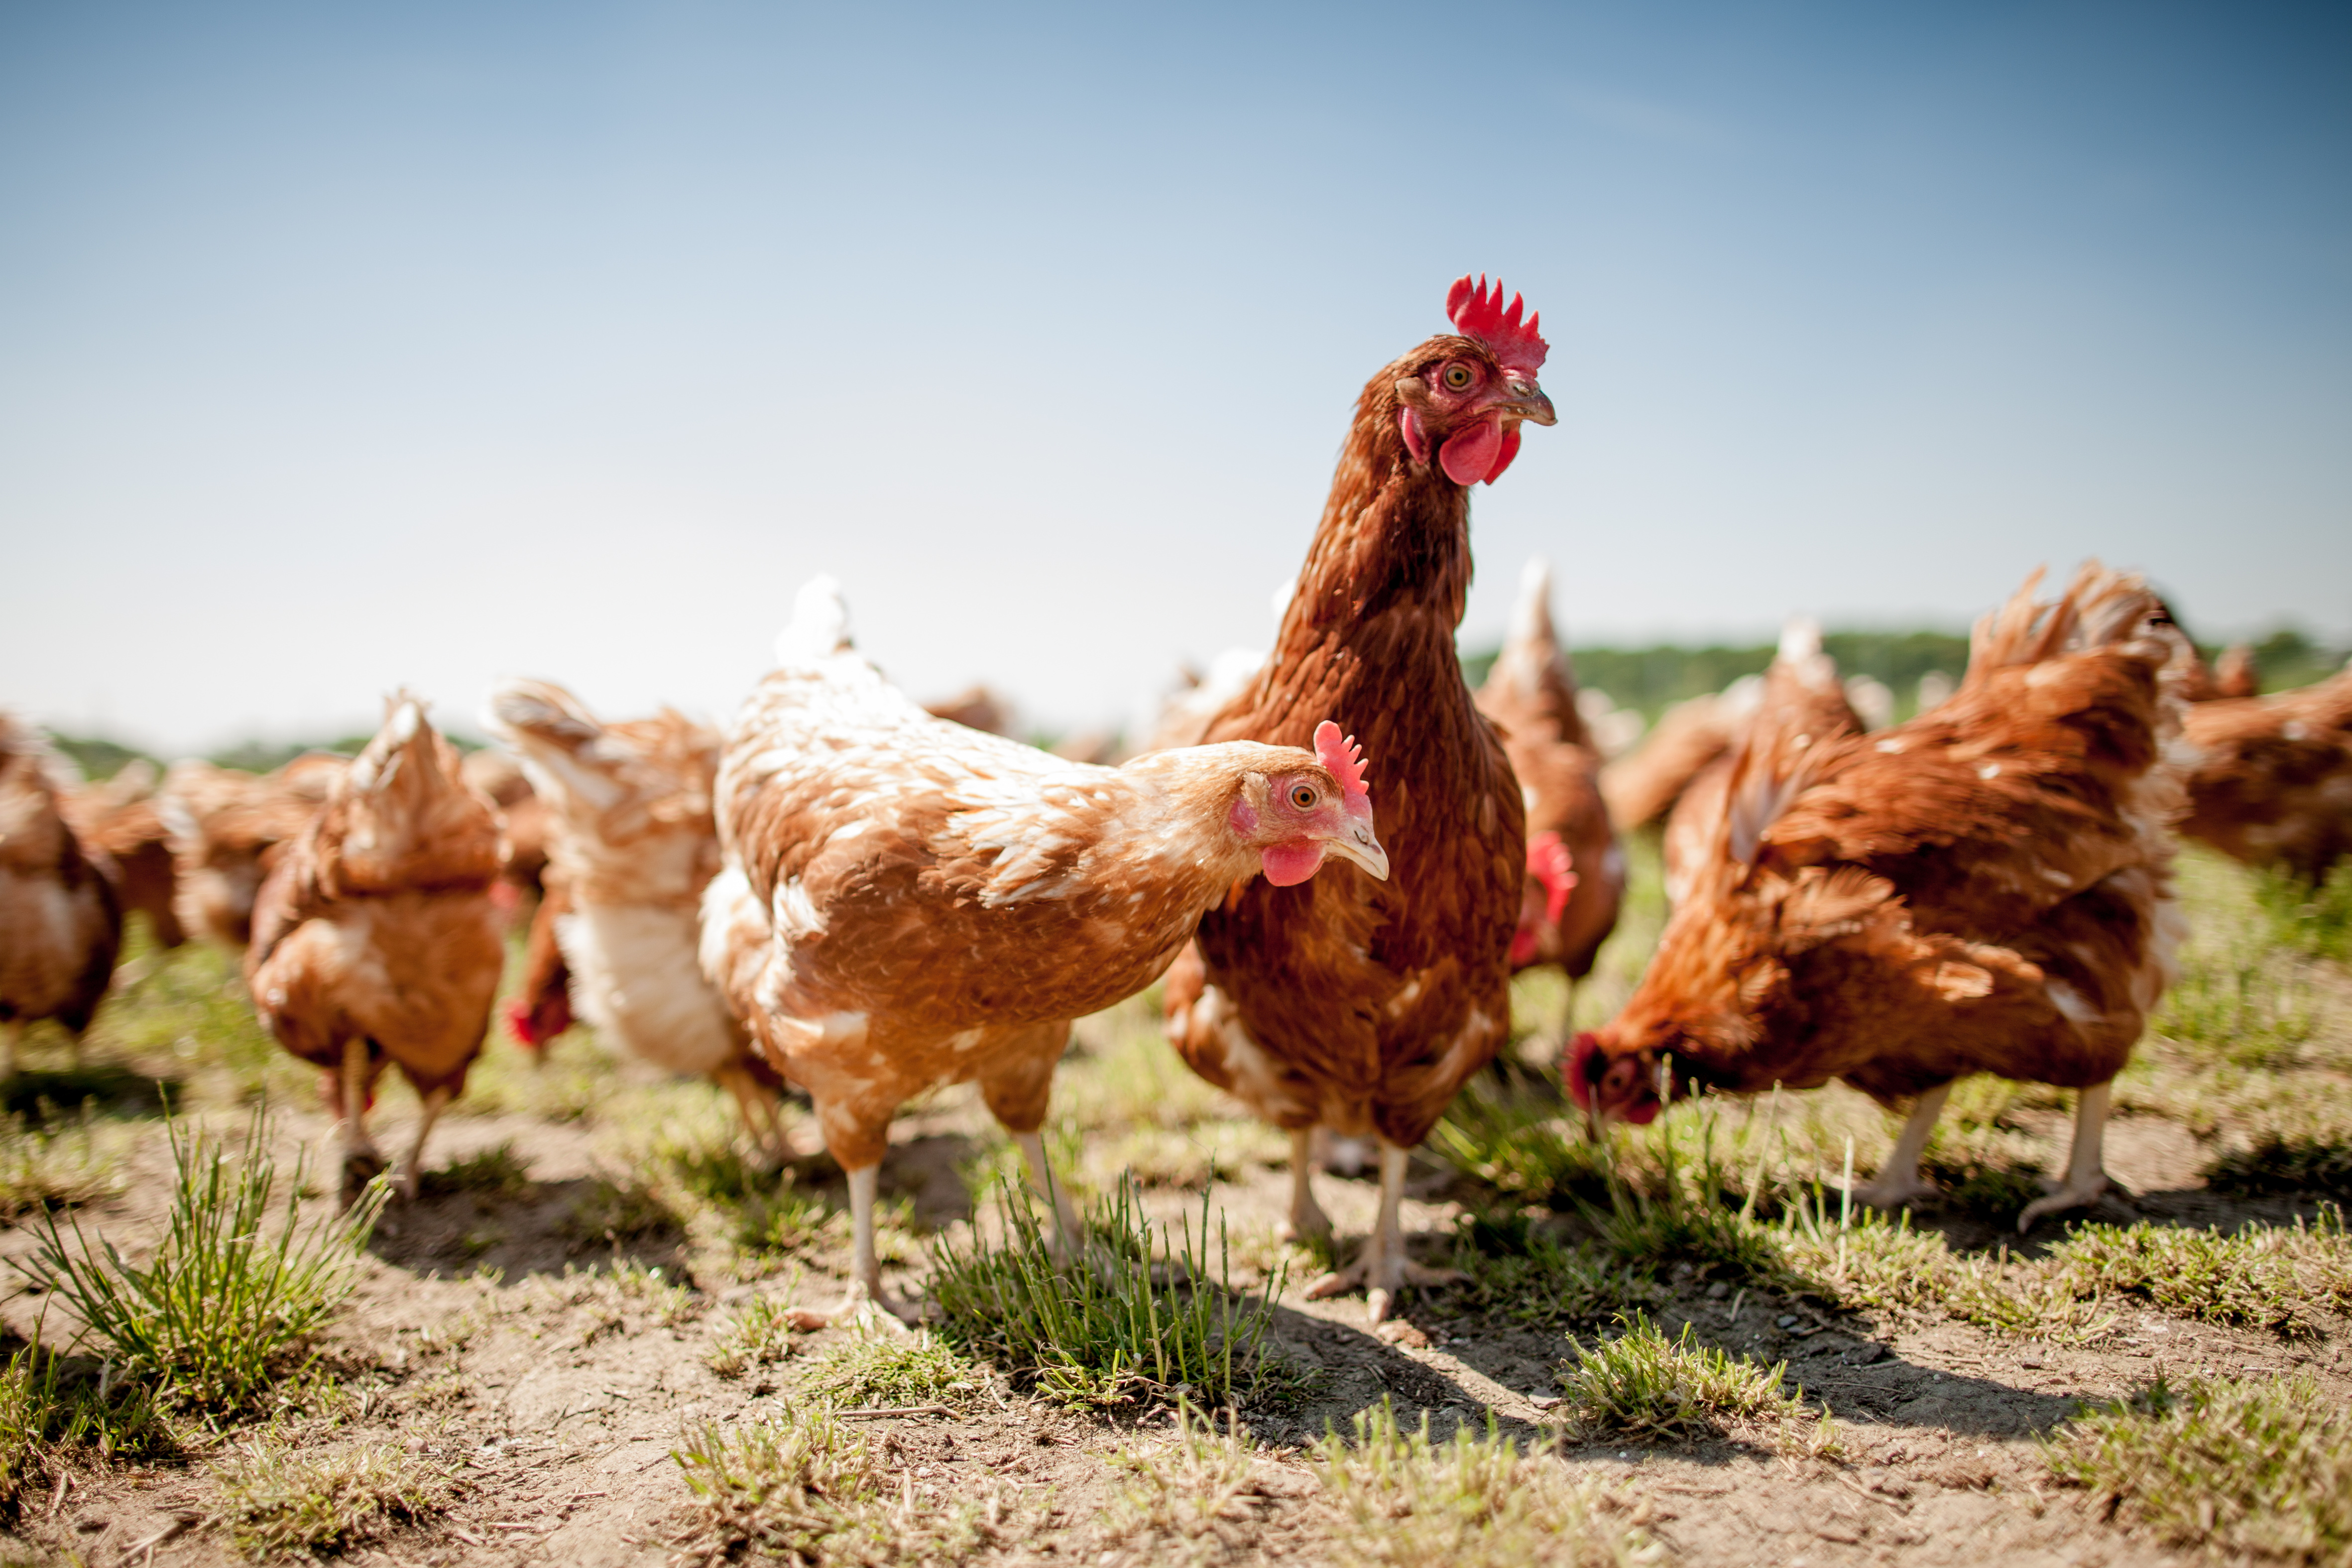 Heat stress is a major challenge for free-range laying hens in hot climates